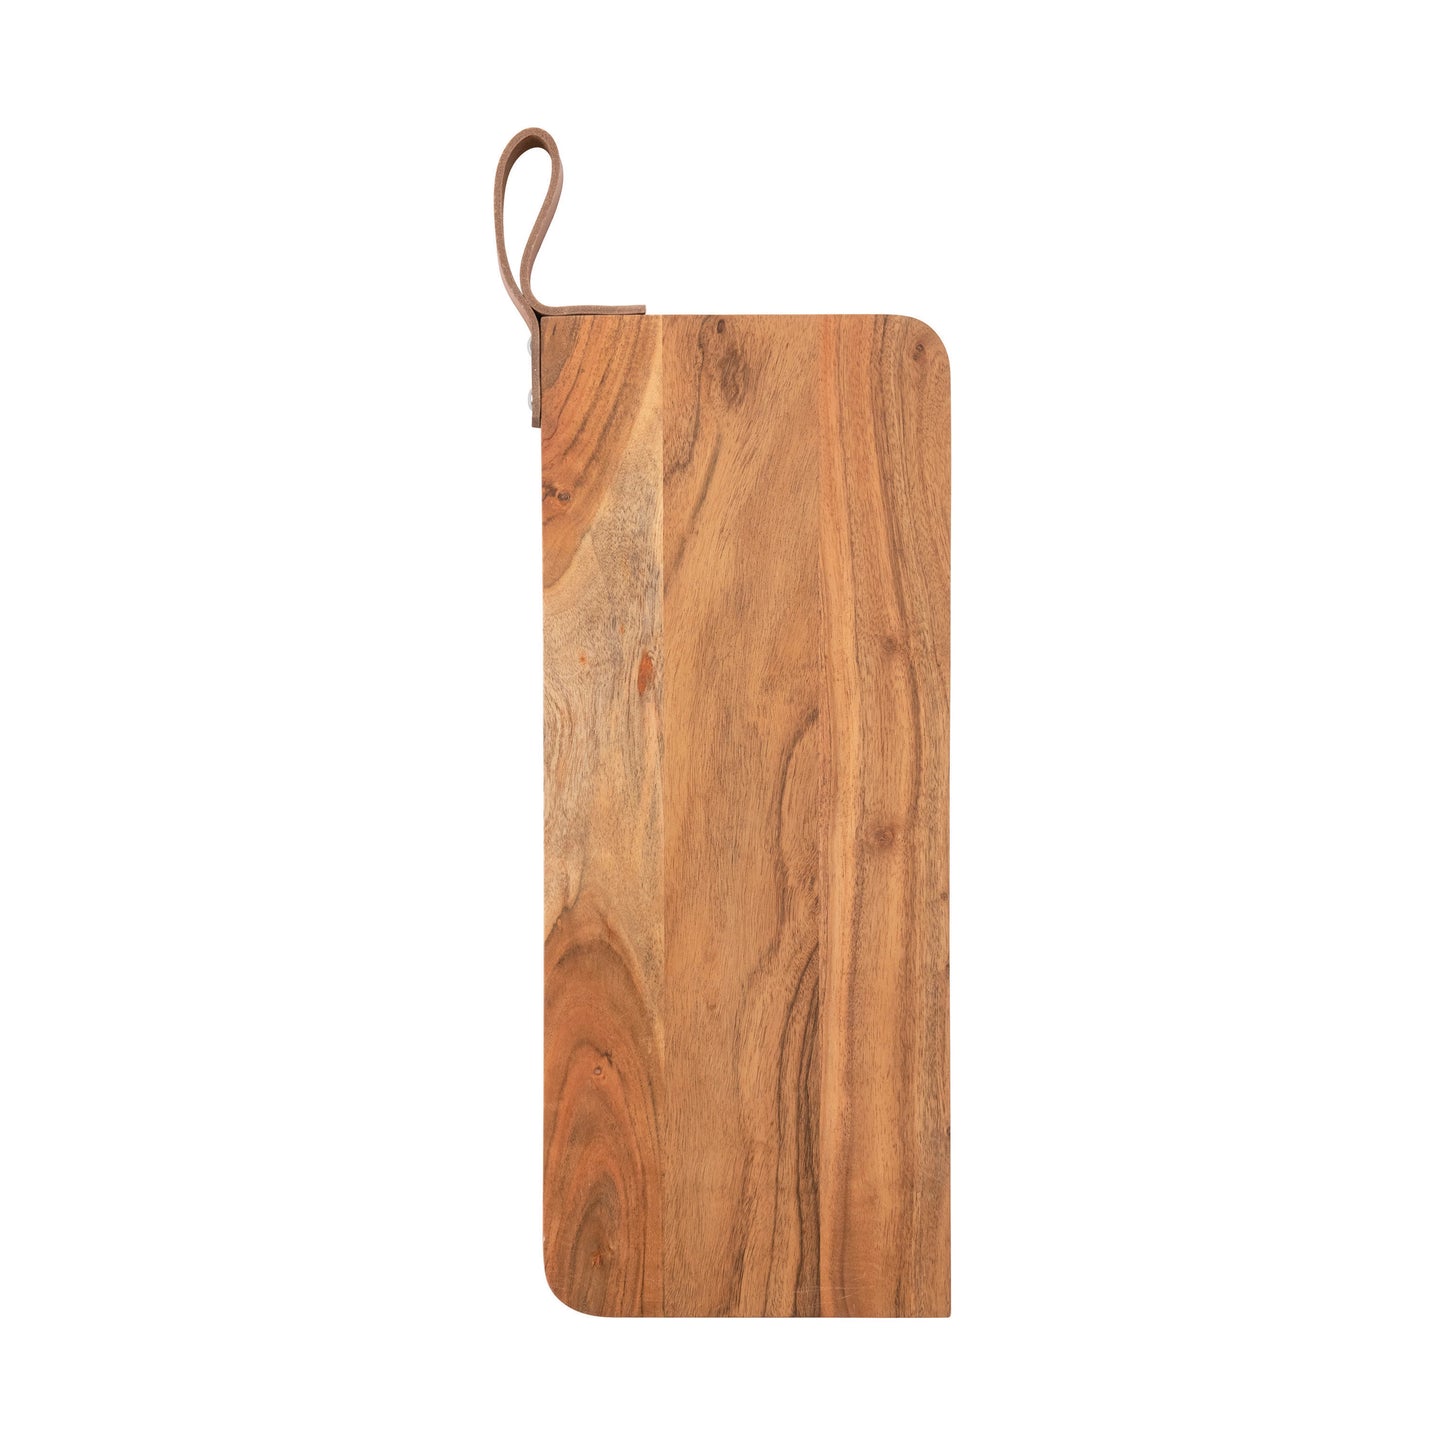 Acacia Wood Board with Leather Strap